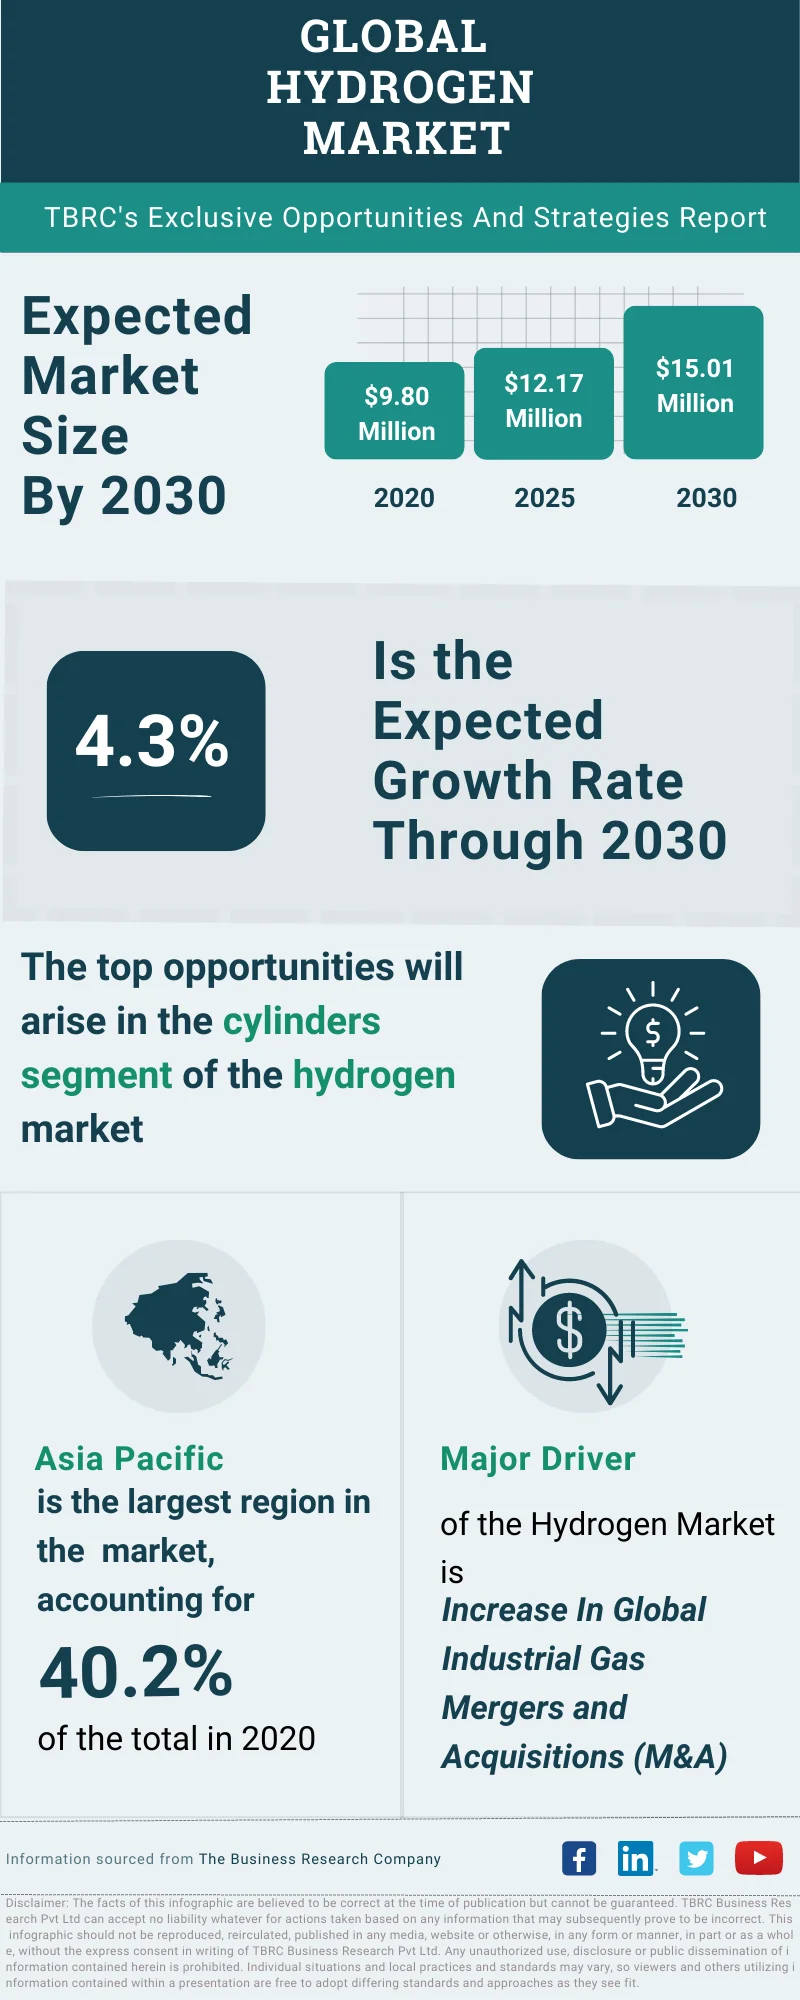 Hydrogen Global Market Opportunities And Strategies To 2032